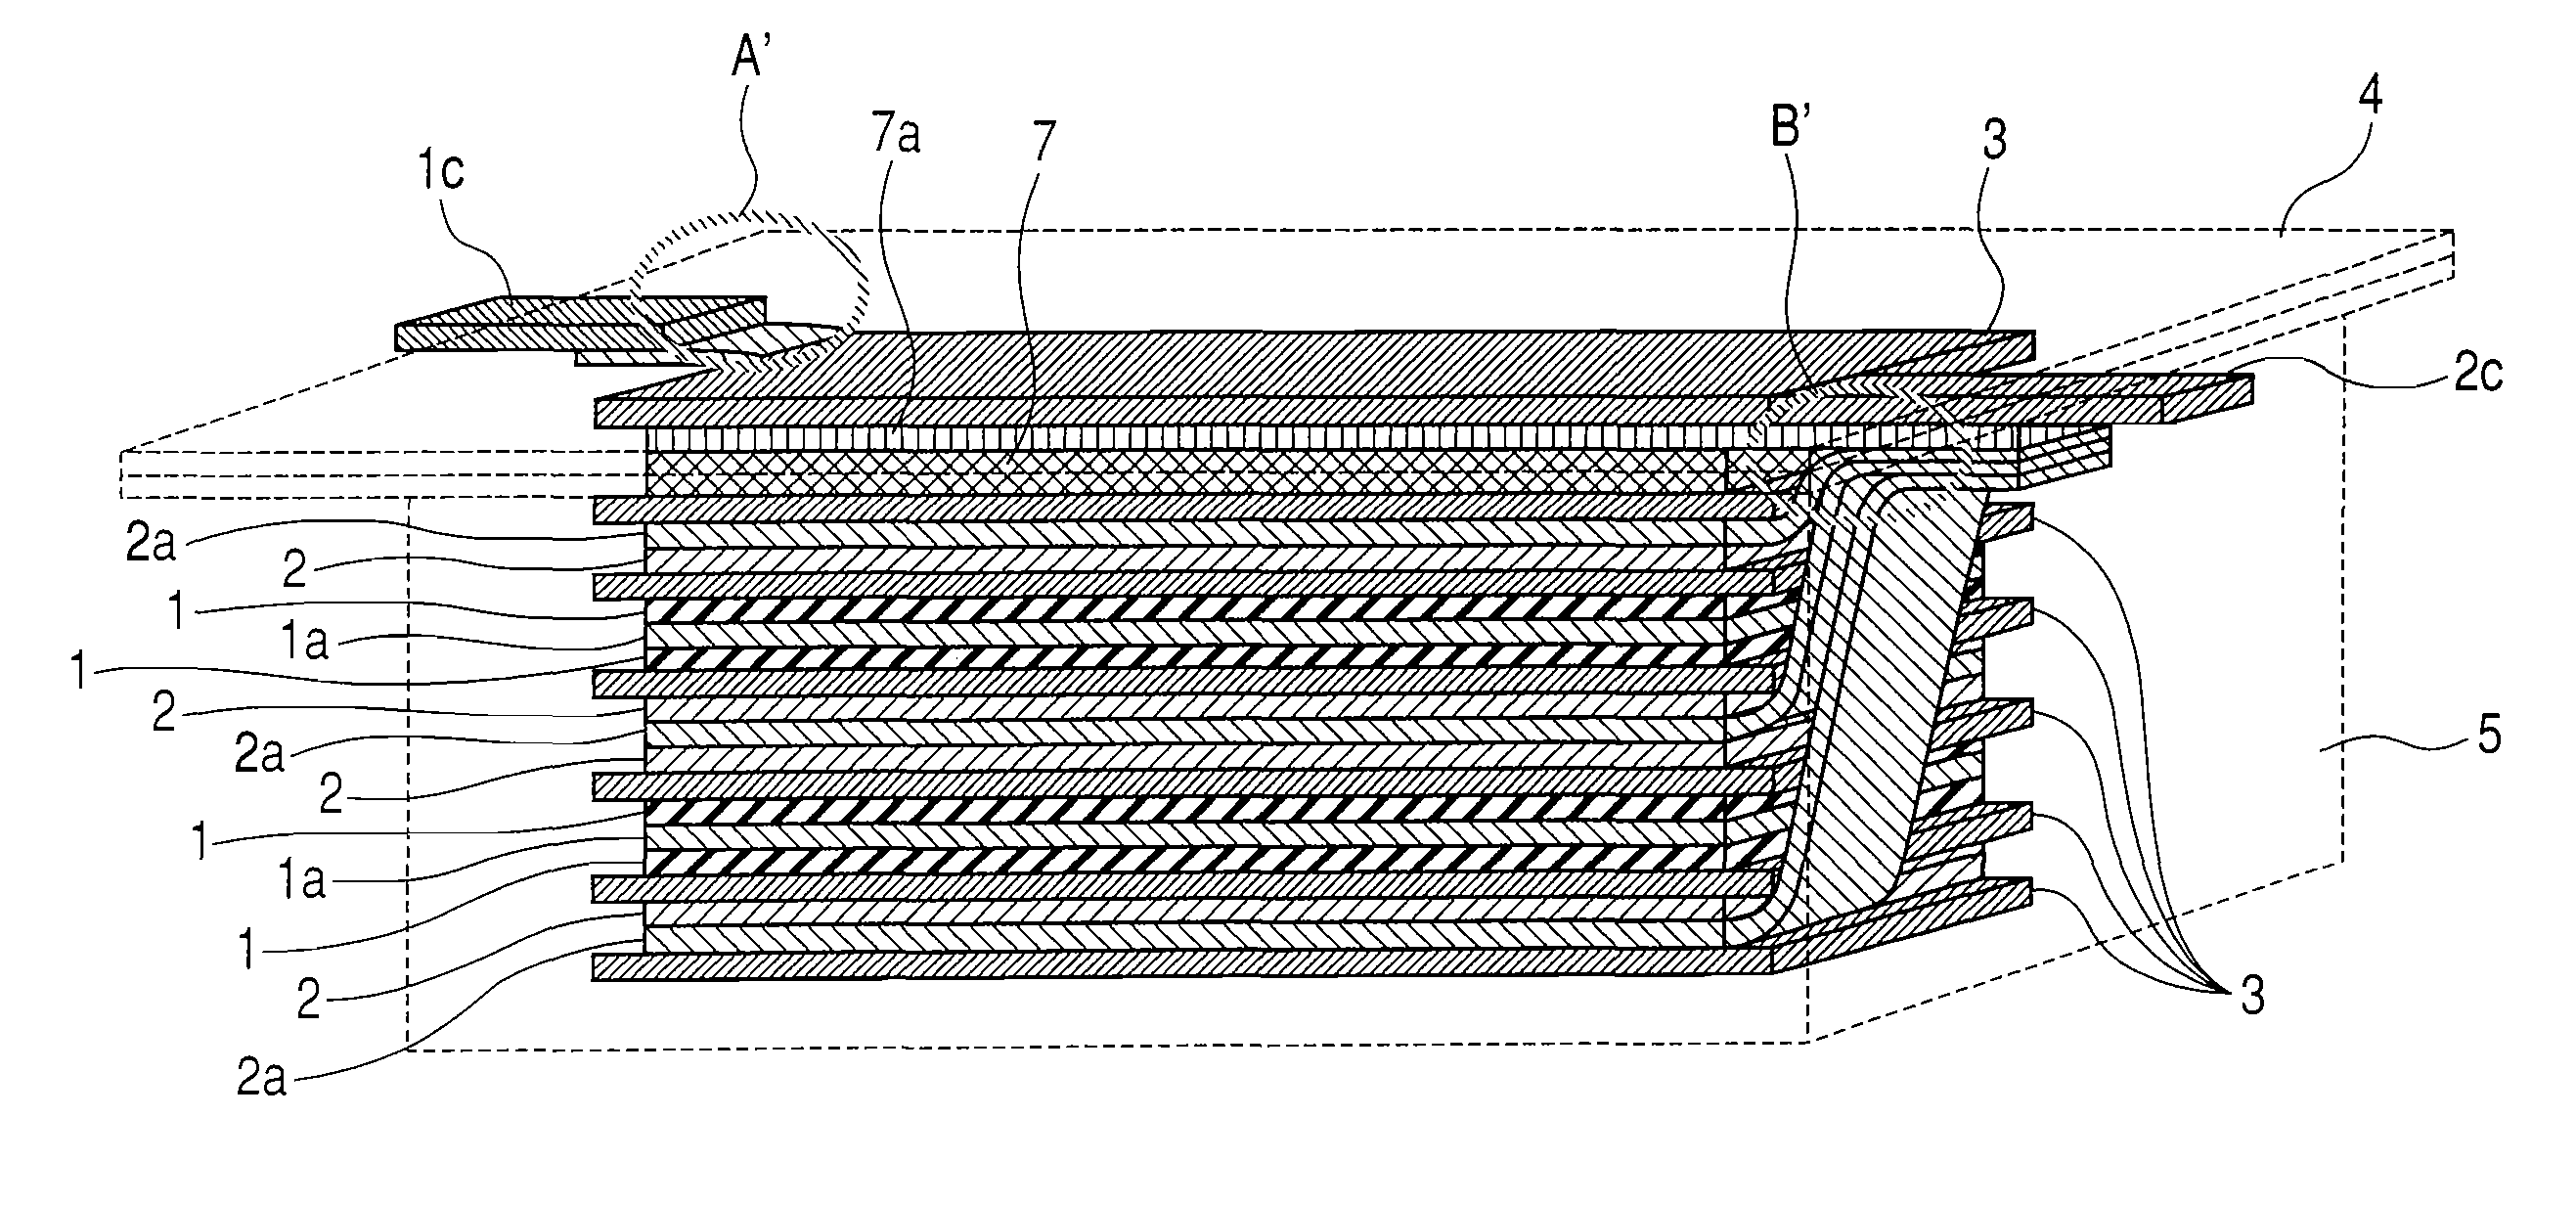 Organic Electrolyte Capacitor Using a Mesopore Carbon Material as a Negative Electrode